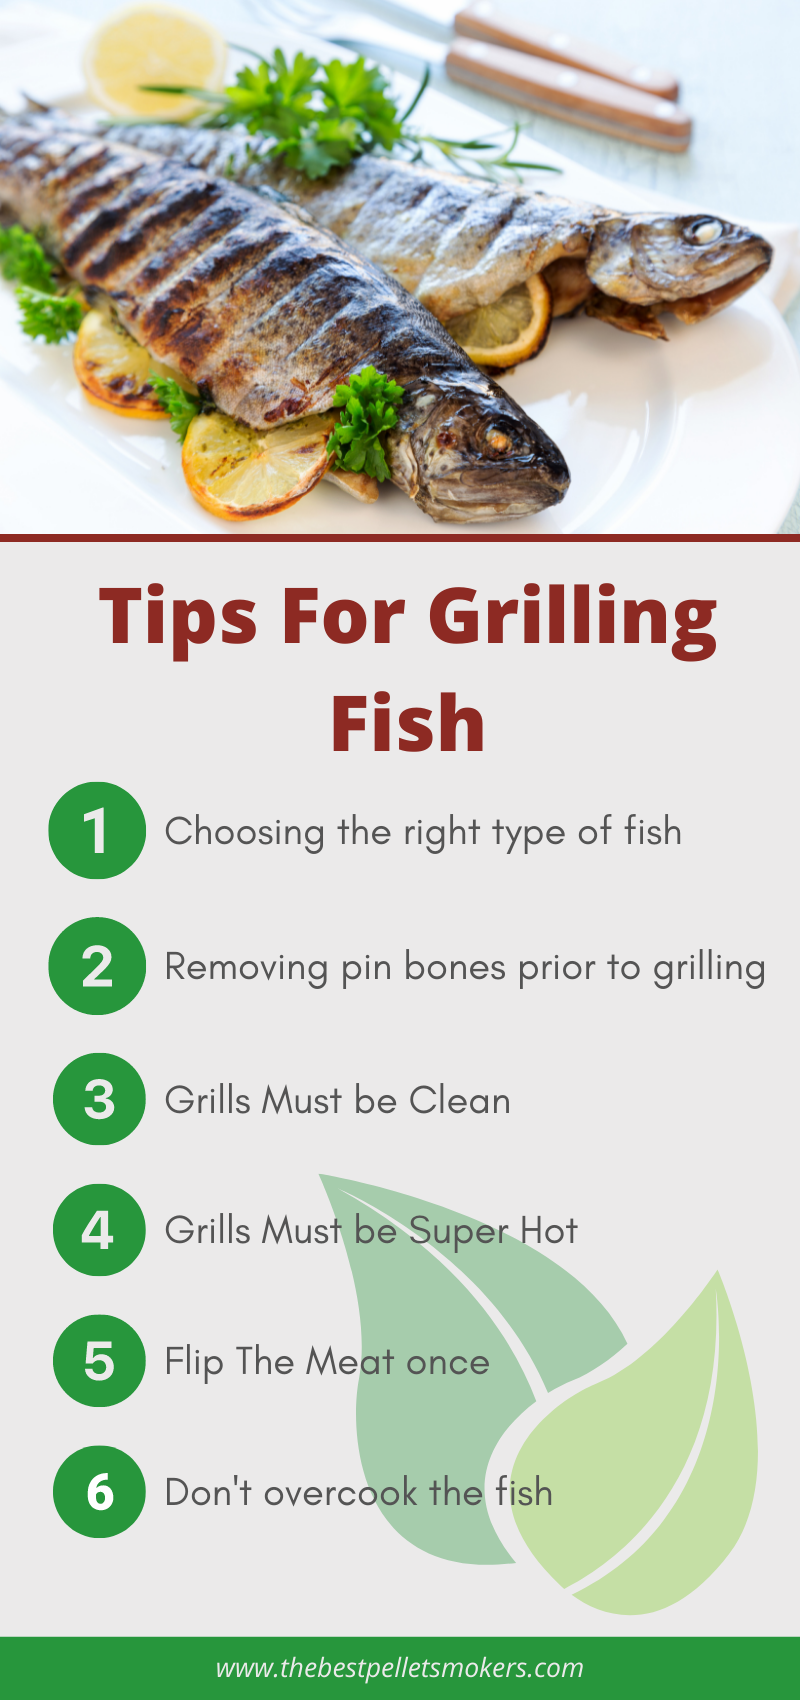 6 Tips For Grilling Fish